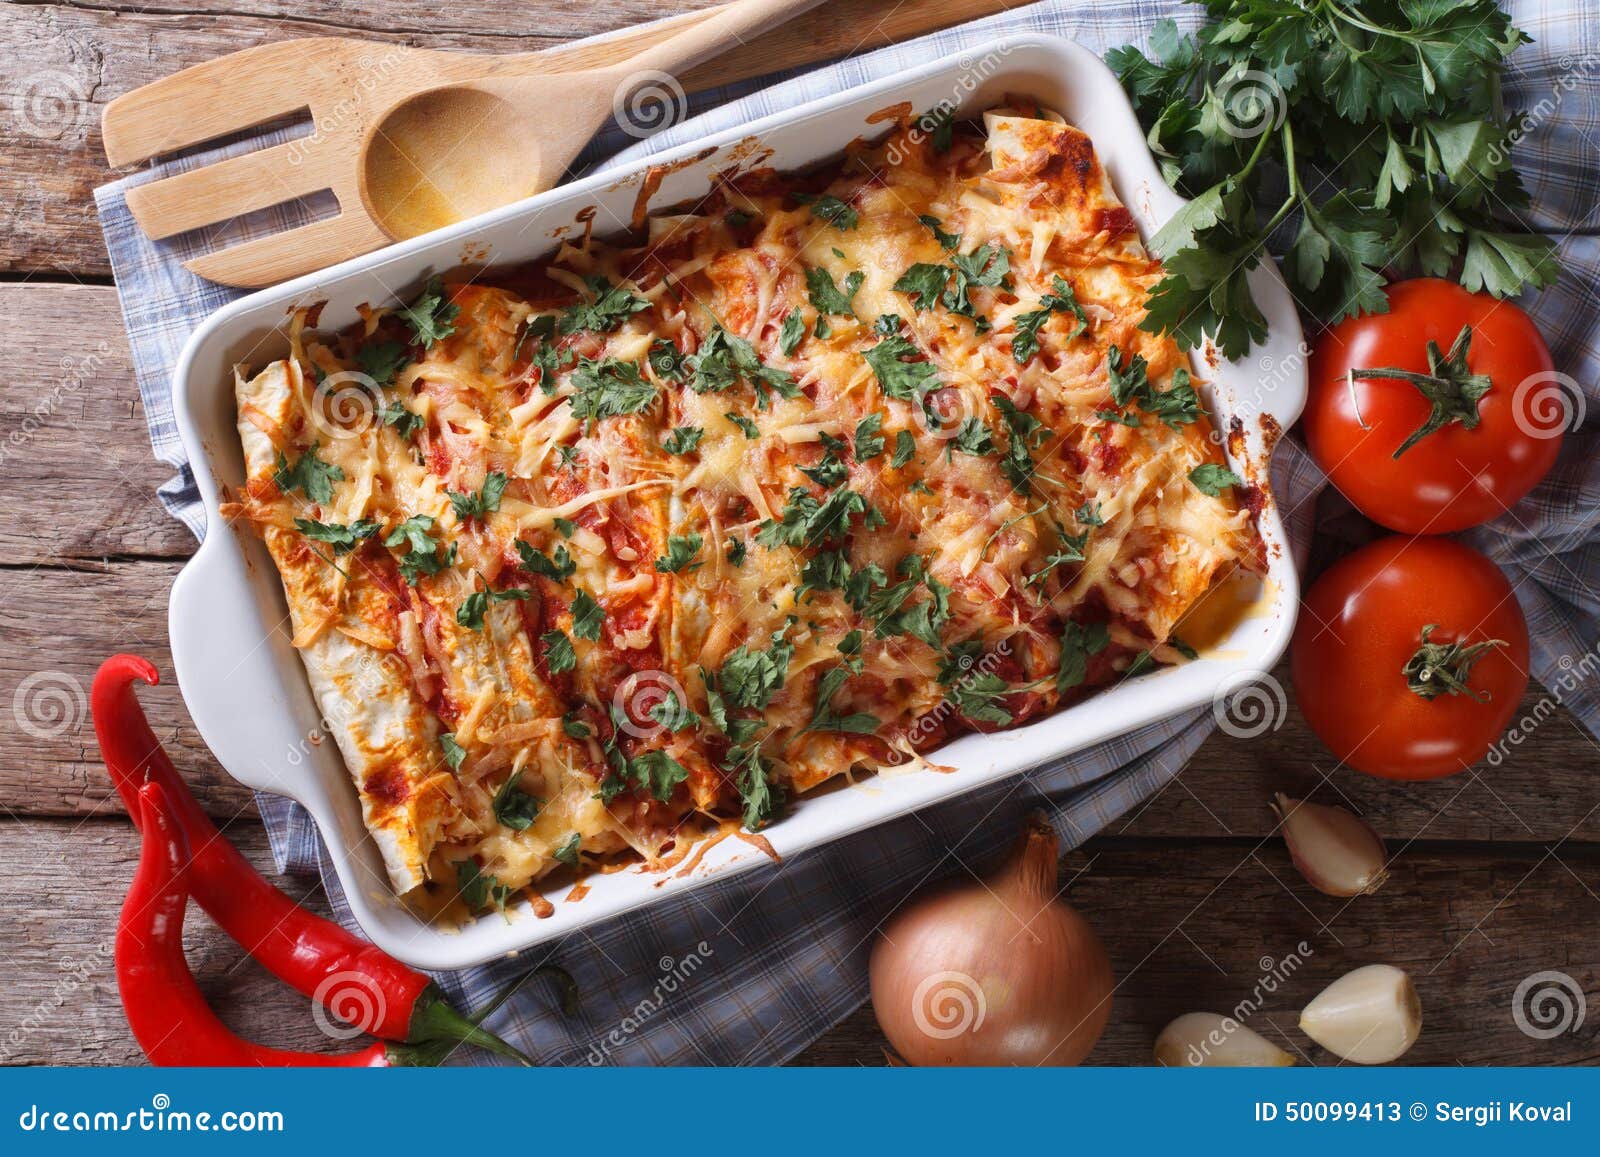 mexican enchilada in a baking dish horizontal top view close-up